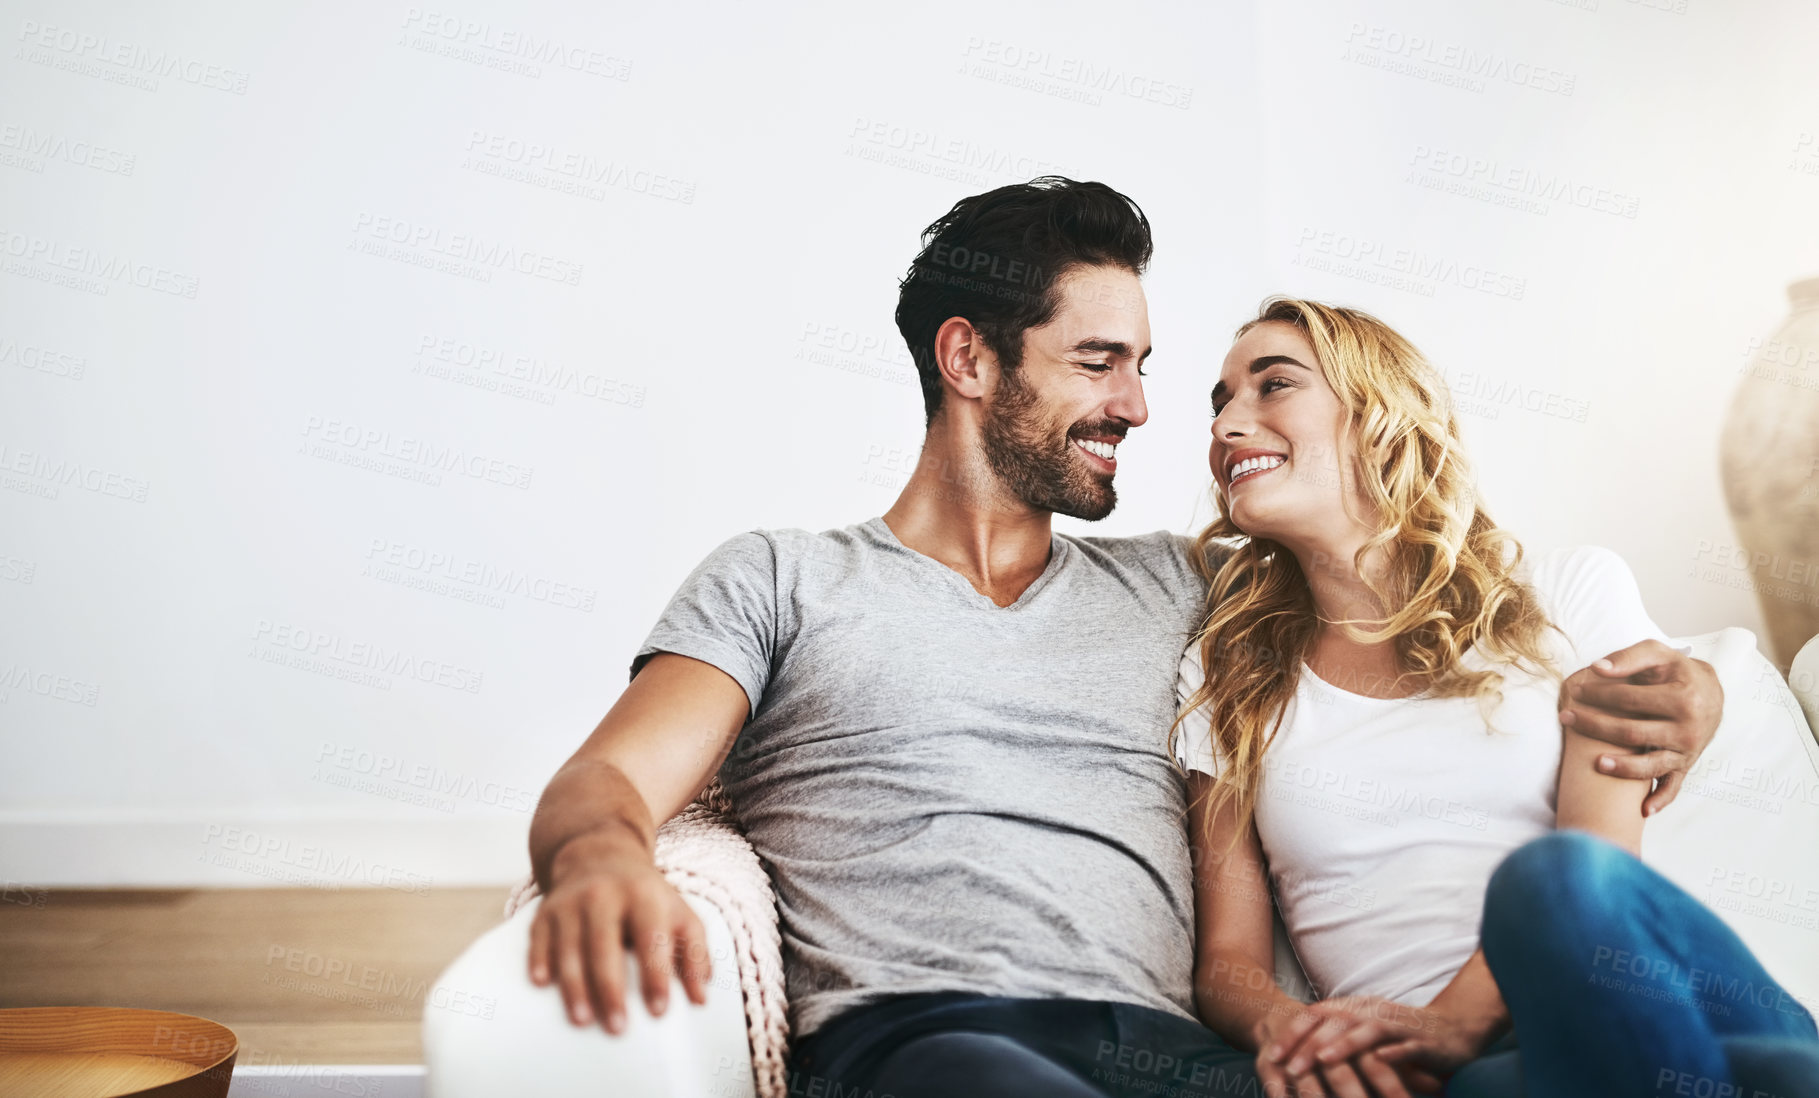 Buy stock photo Smile, relax or happy couple hugging on house sofa bonding or smiling with trust or loyalty together. Smile, lovers or woman enjoys quality time with a romantic man on couch on weekend break at home